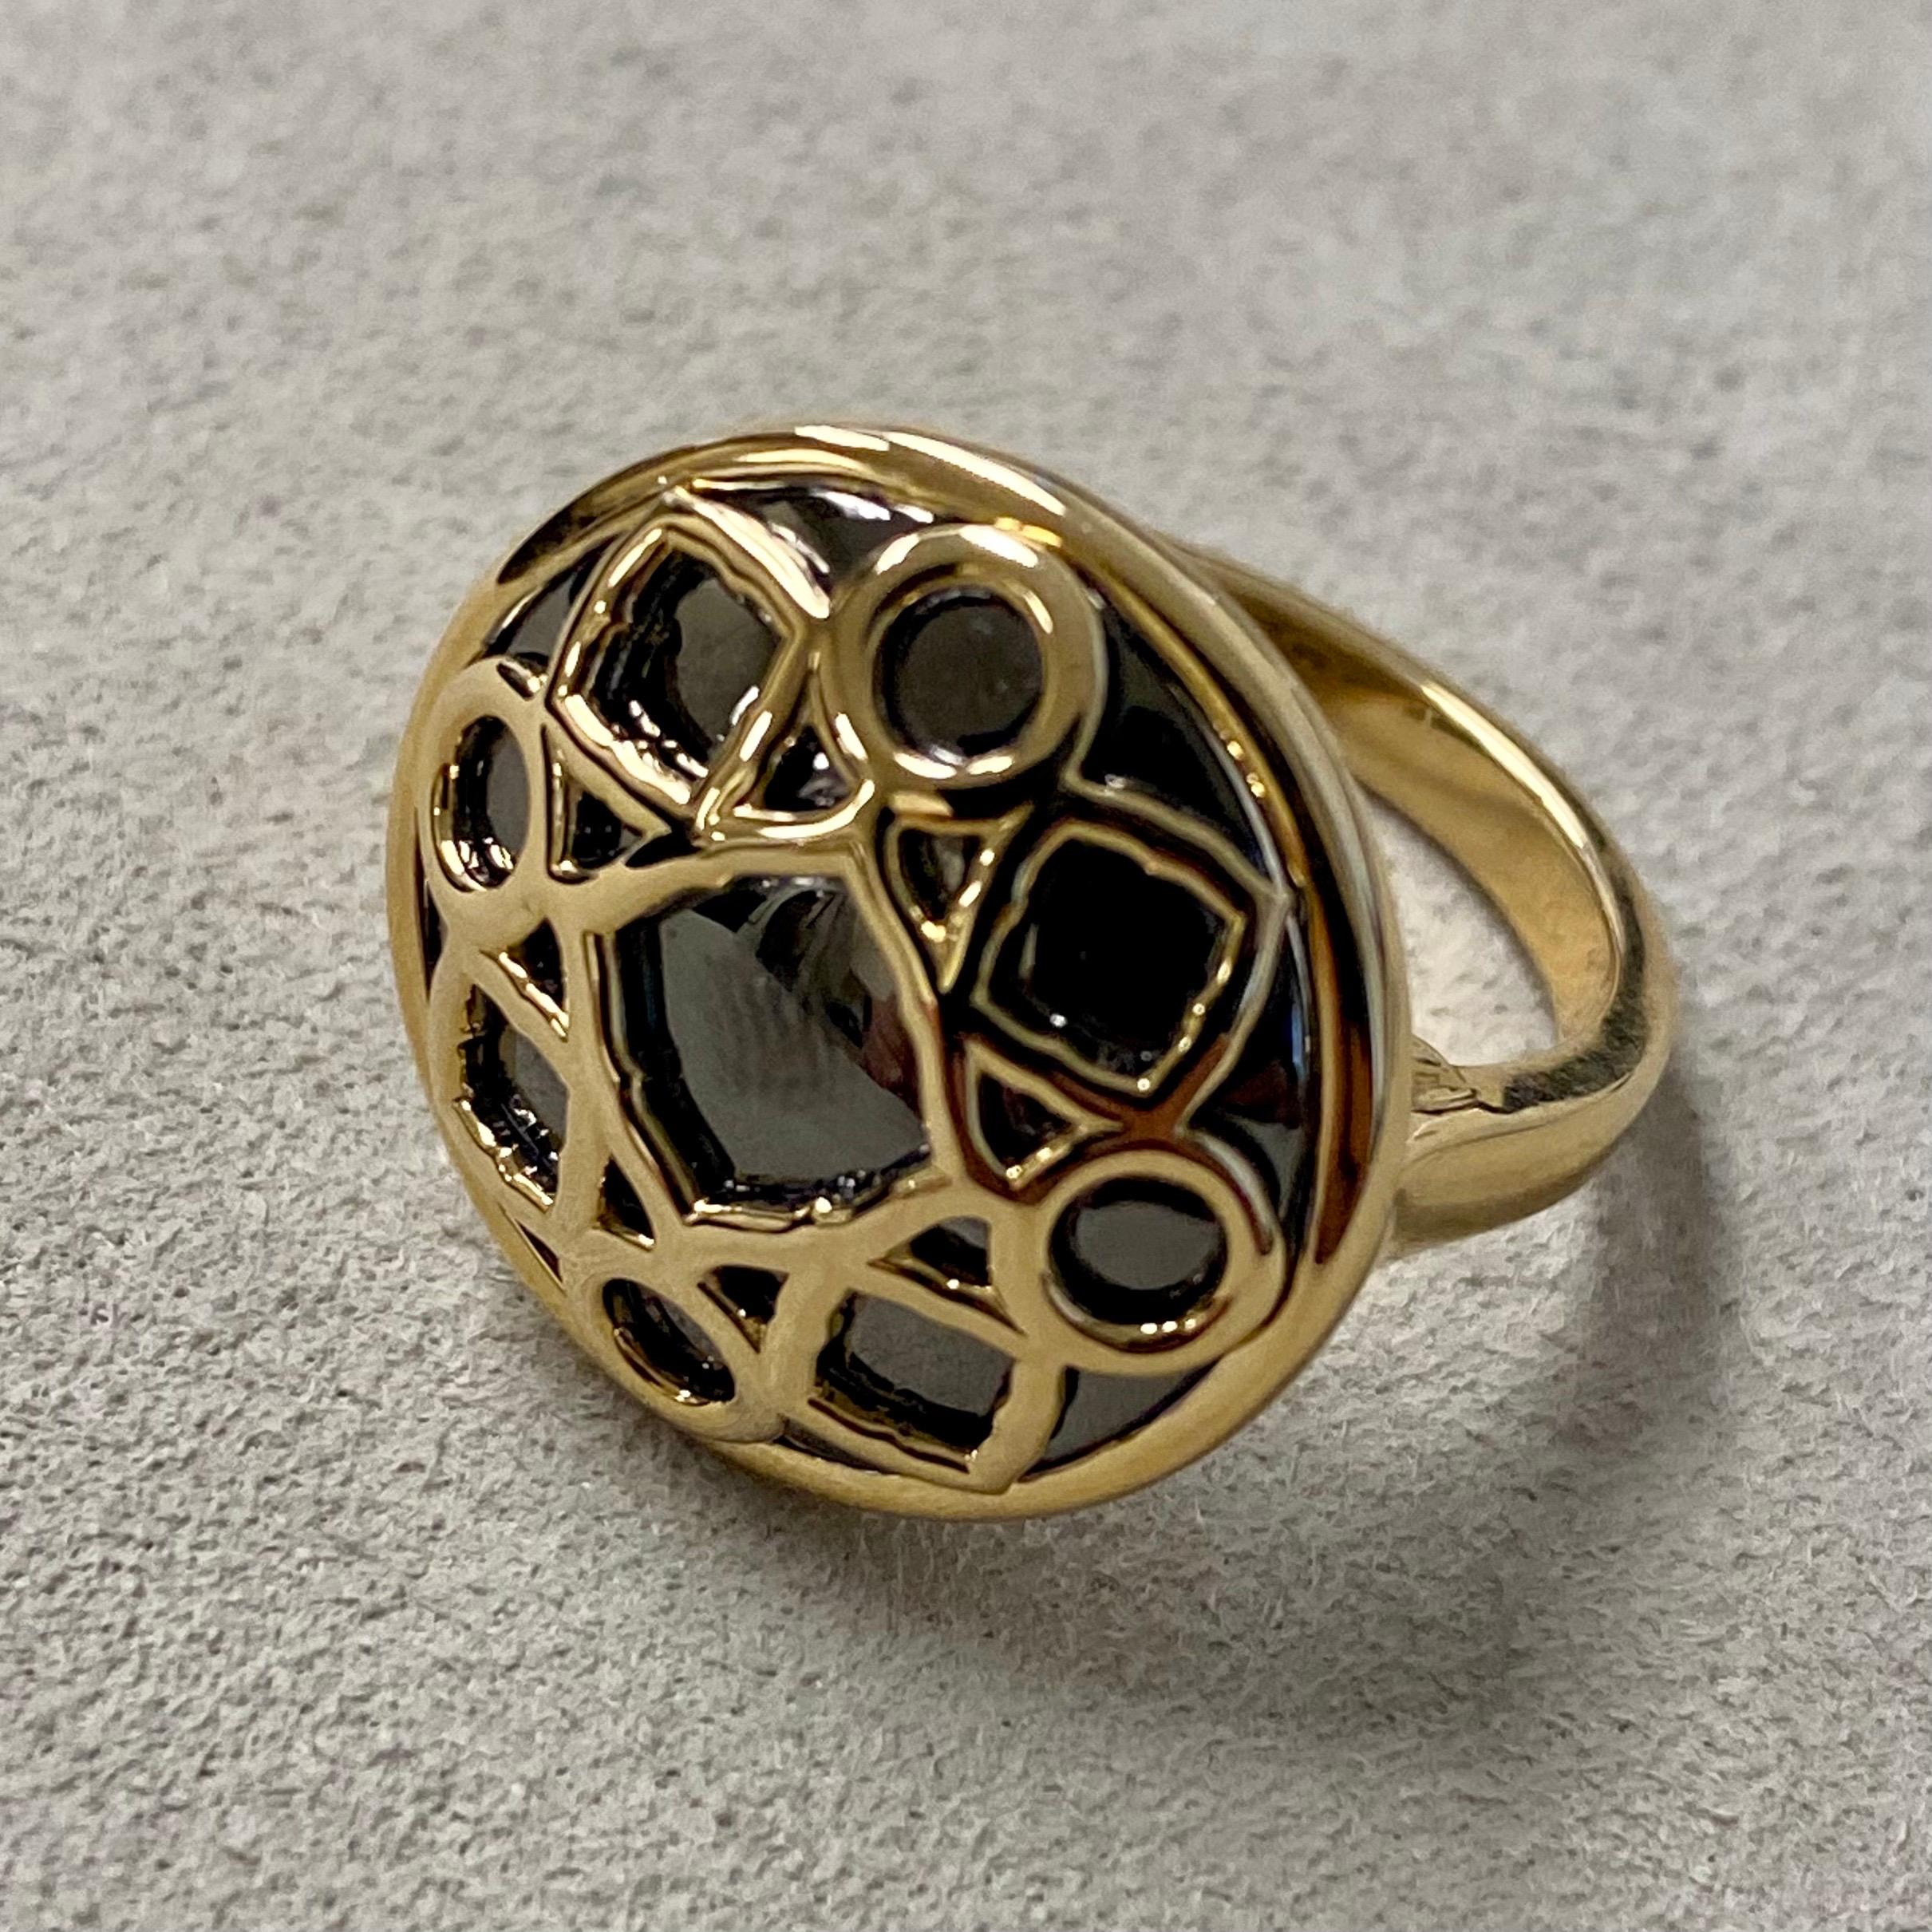 Created in 18 karat yellow gold with oxidized silver accents
Oxidized silver back-plate for contrast
Ring size US 6.5, can be sized as per request
Limited edition

Inspired by classic elegance, this limited-edition ring is crafted in 18 karat yellow